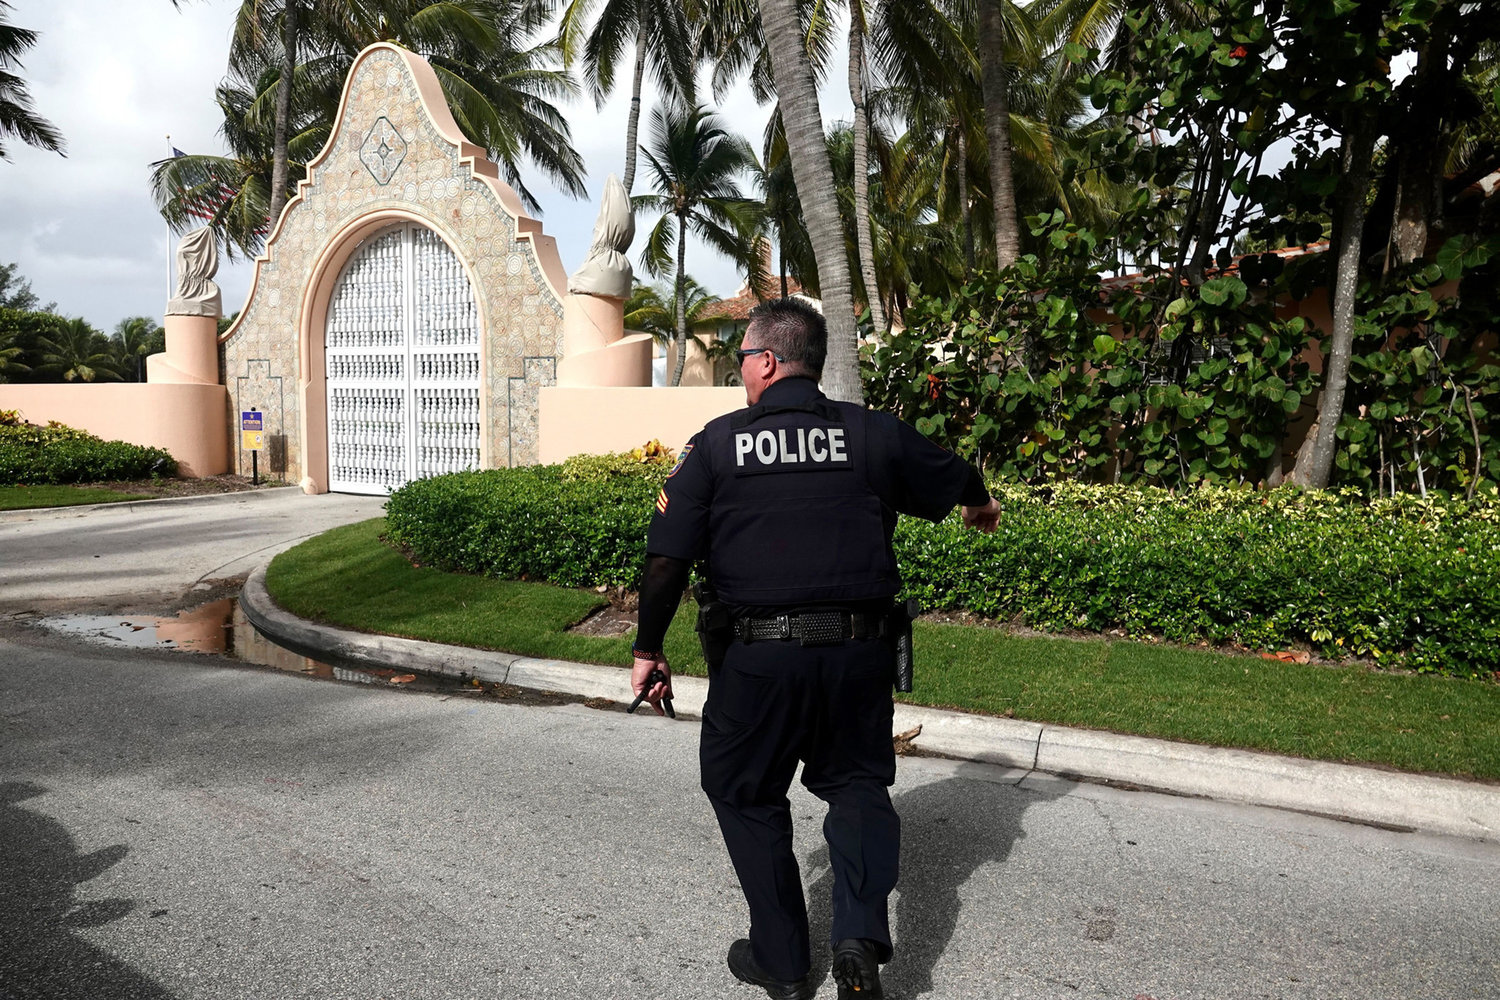 Police outside of Mar-a-Lago in West Palm Beach, Florida, on Tuesday Aug. 9, 2022, the day after the FBI searched Donald Trump's estate. (Joe Cavaretta/South Florida Sun Sentinel/TNS)